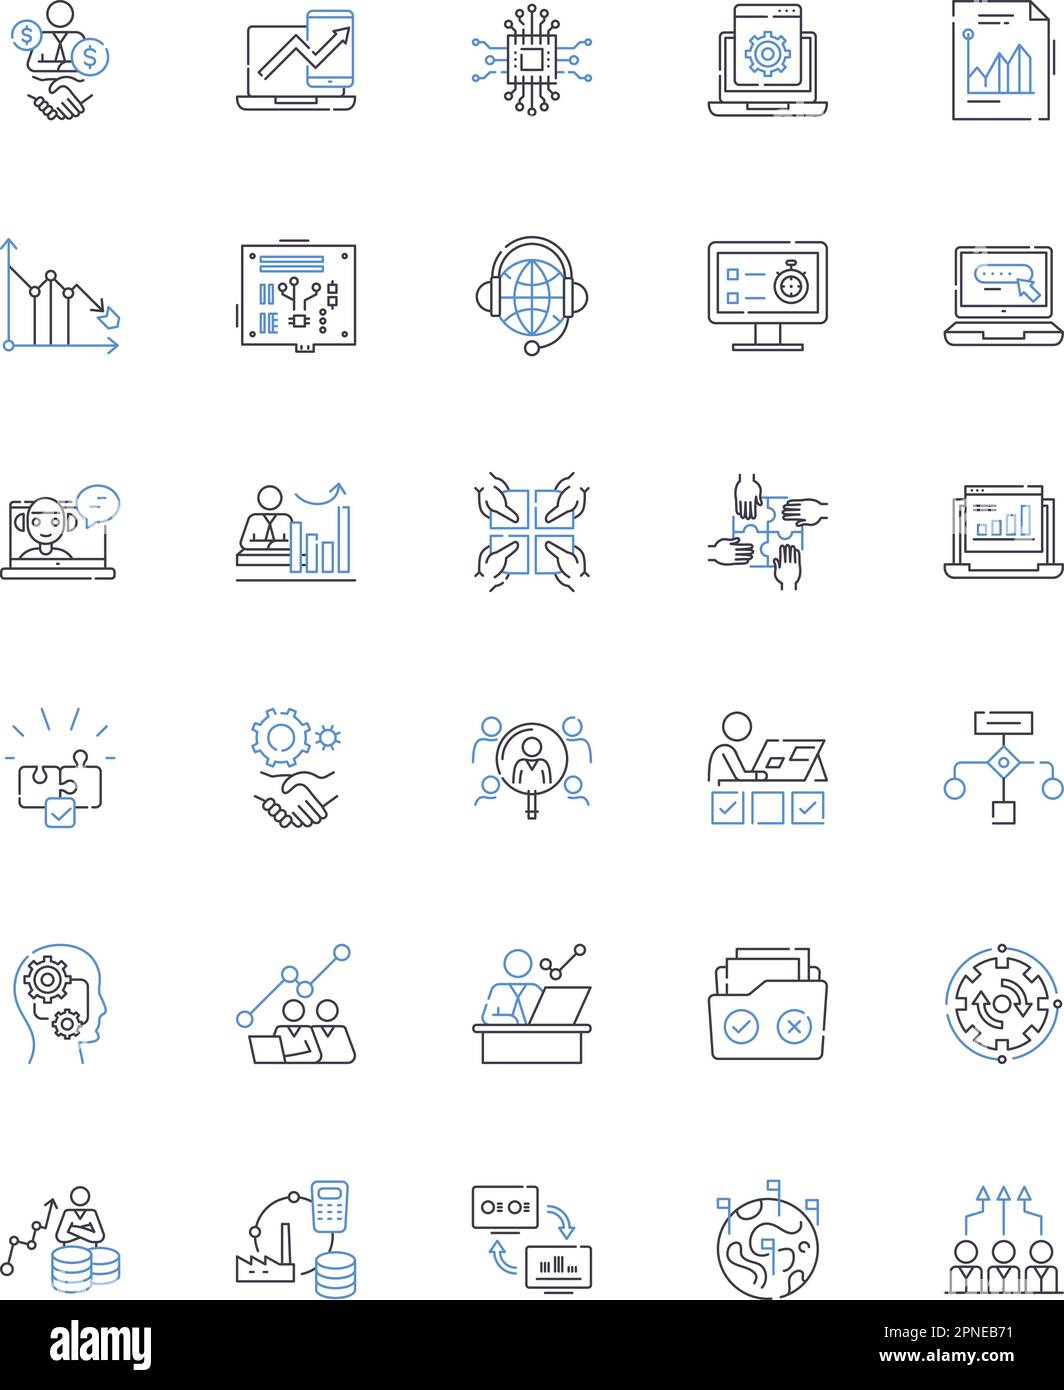 Data analysis line icons collection. Analytics, Statistics, Modeling, Visualization, Interpolation, Segmentation, Regression vector and linear Stock Vector